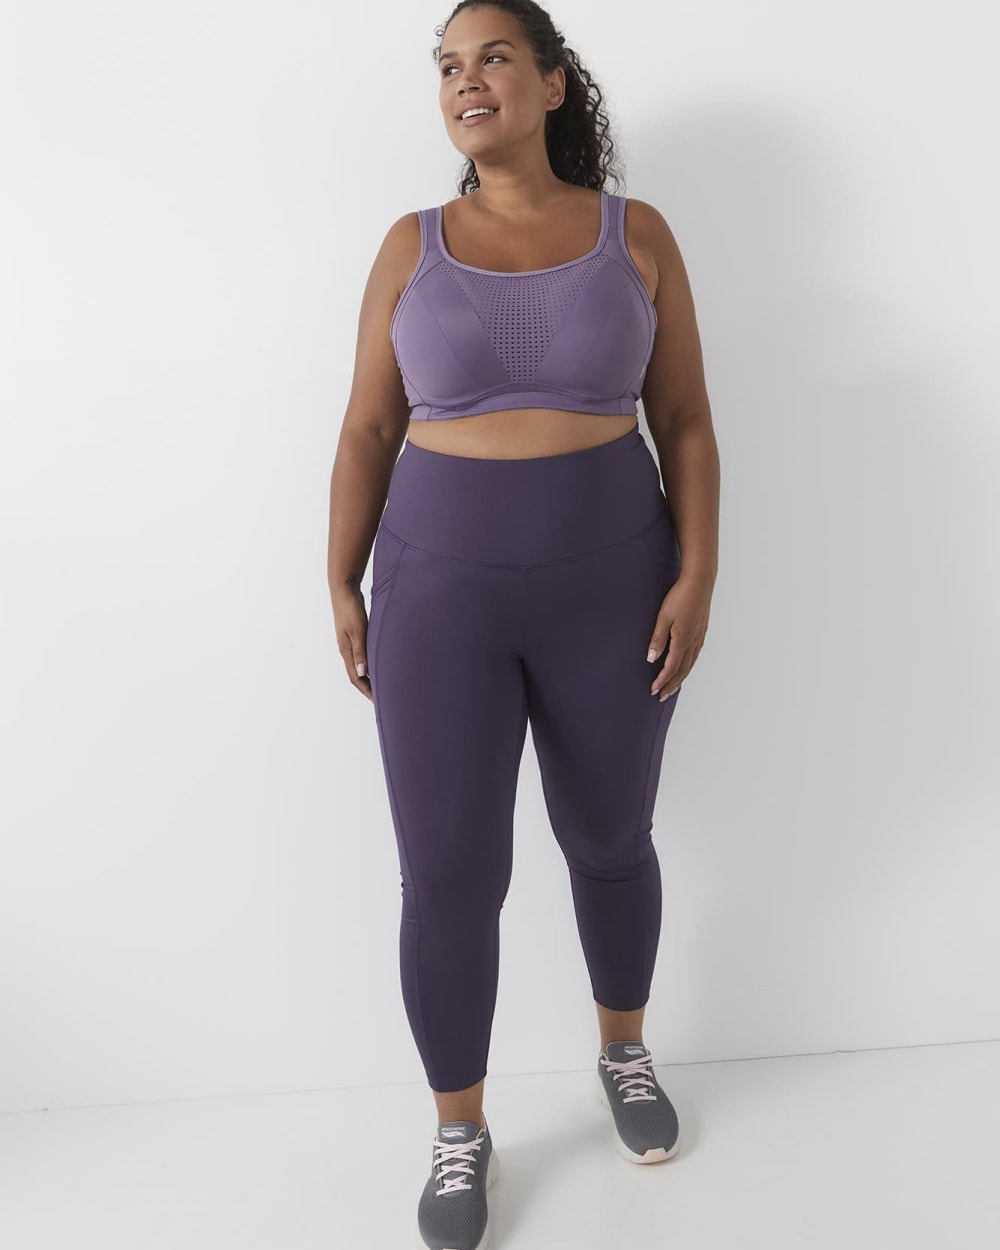 Responsible, Solid Legging with Side Pockets - Active Zone